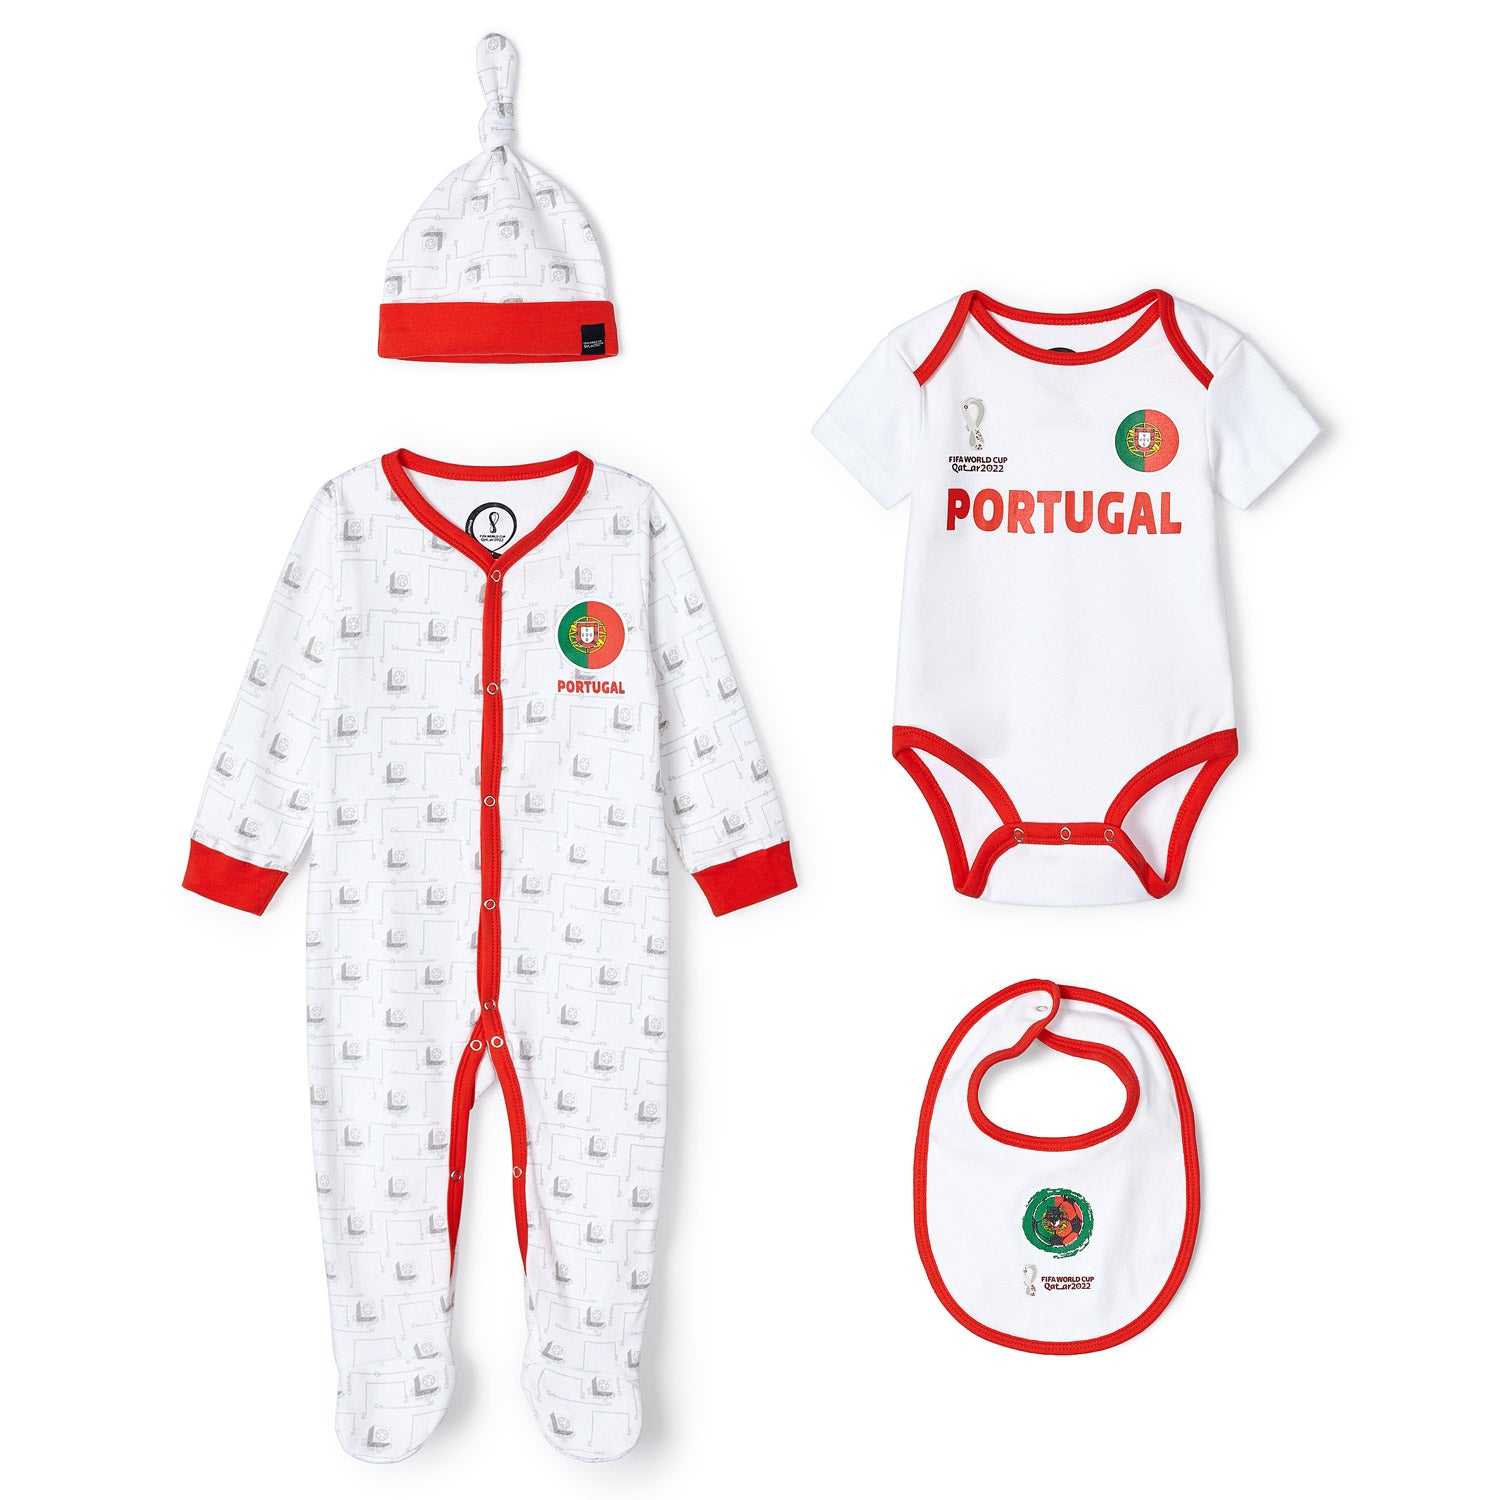 2022 World Cup Portugal White Romper - Infant/Toddler